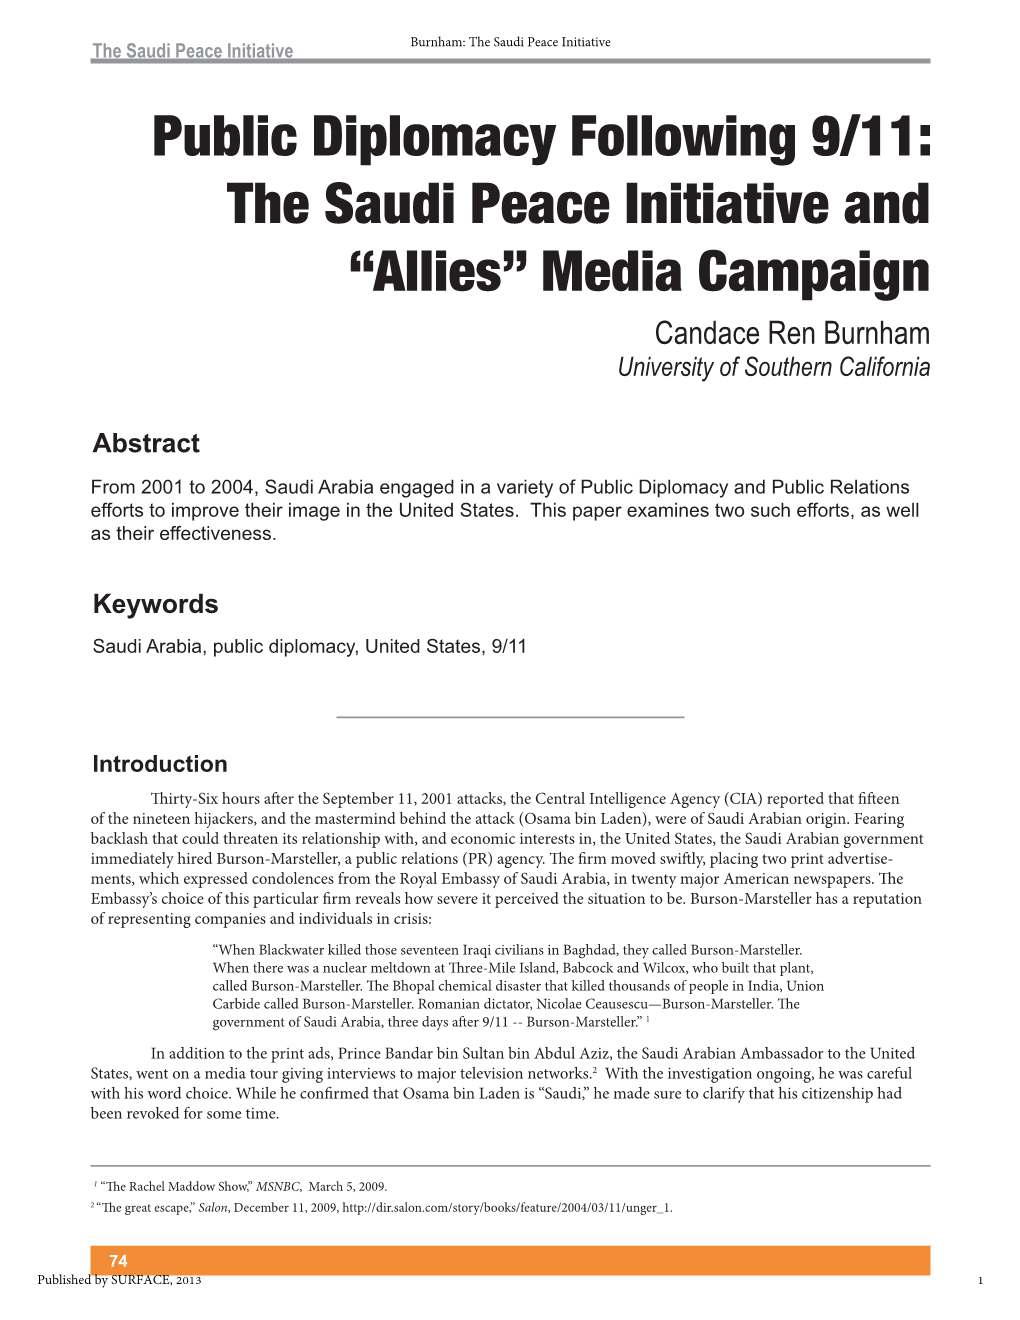 Public Diplomacy Following 9/11: the Saudi Peace Initiative and “Allies” Media Campaign !"#$"%&'(&#')*+#,"- 8QLYHUVLW\RI6RXWKHUQ&DOLIRUQLD